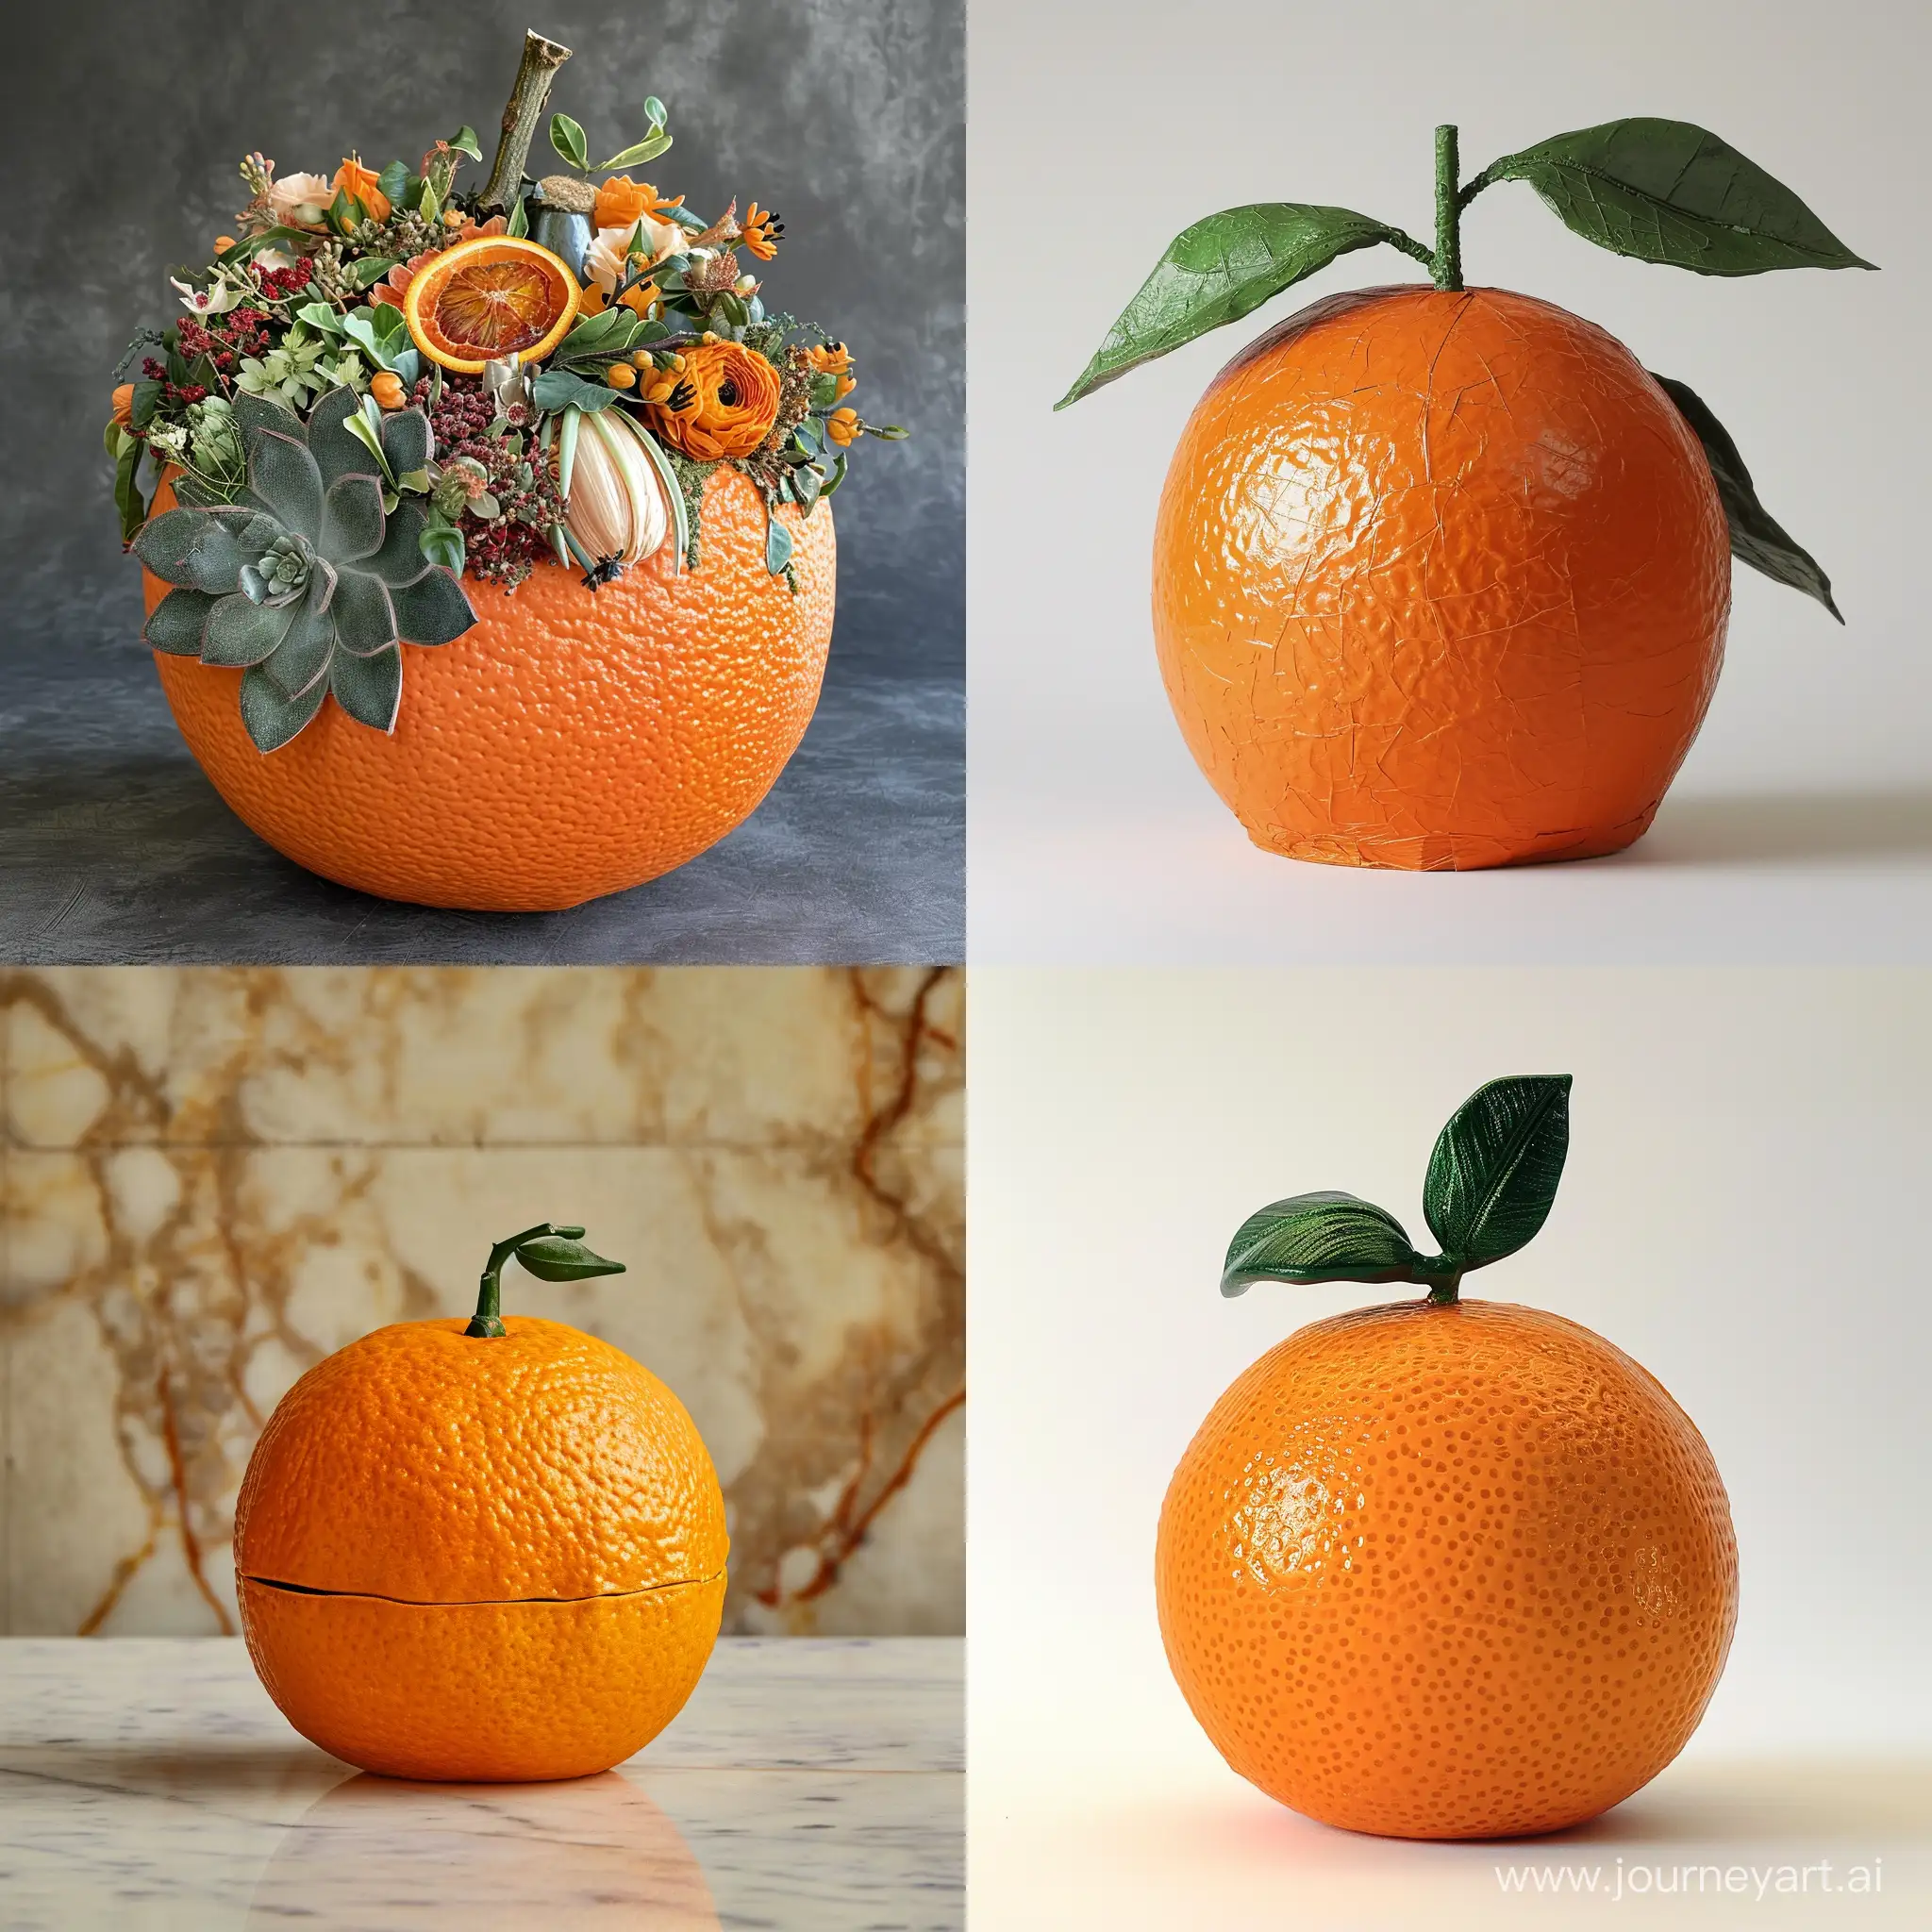 Give me the most creative packaging of decorative stuff in size of a big orange